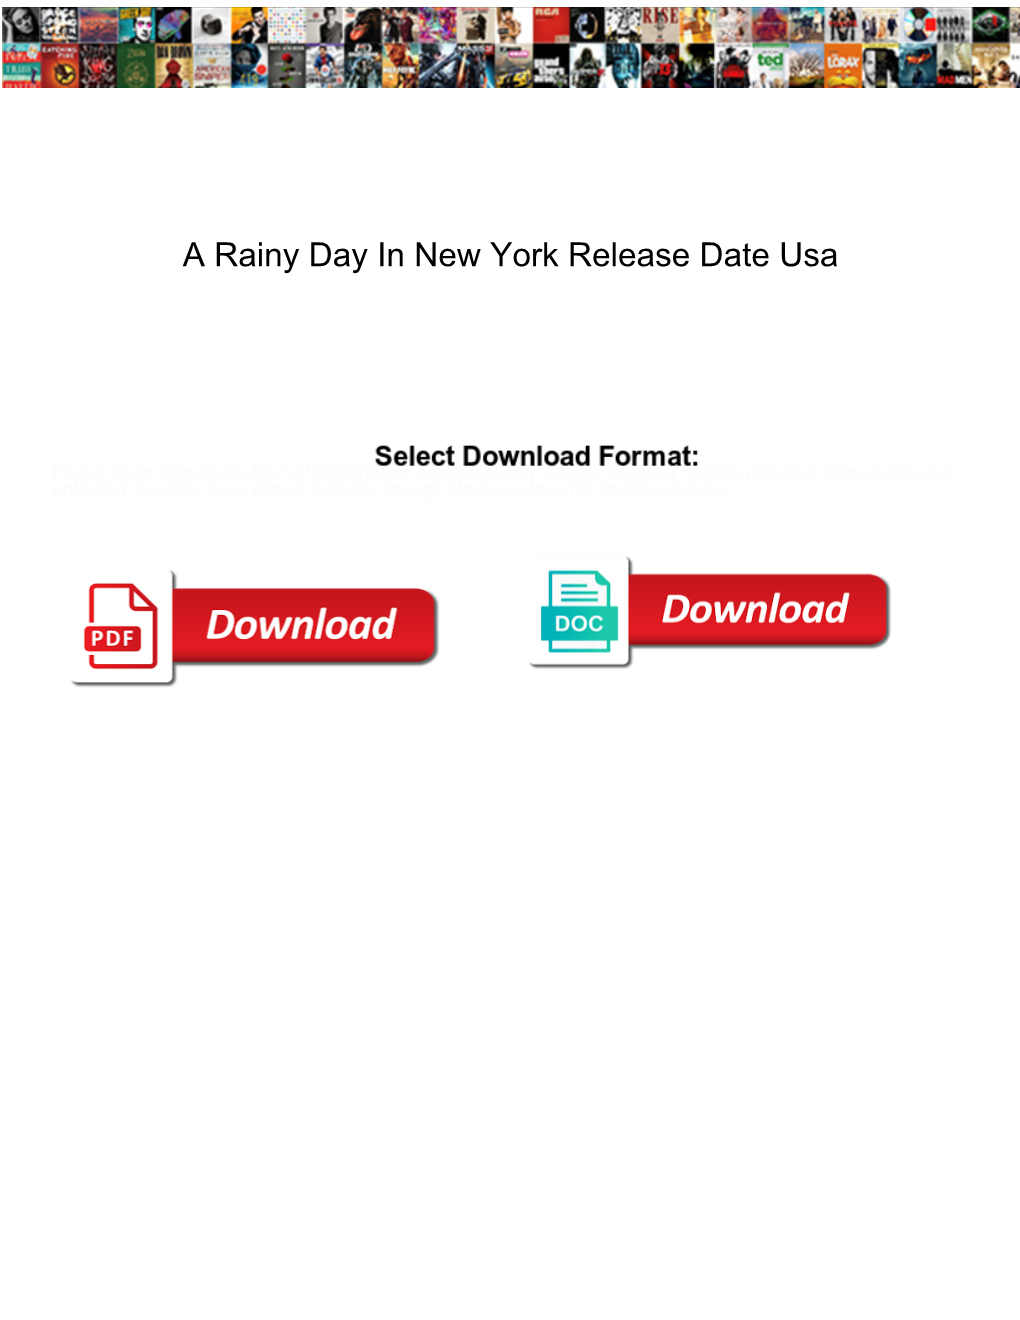 A Rainy Day in New York Release Date Usa